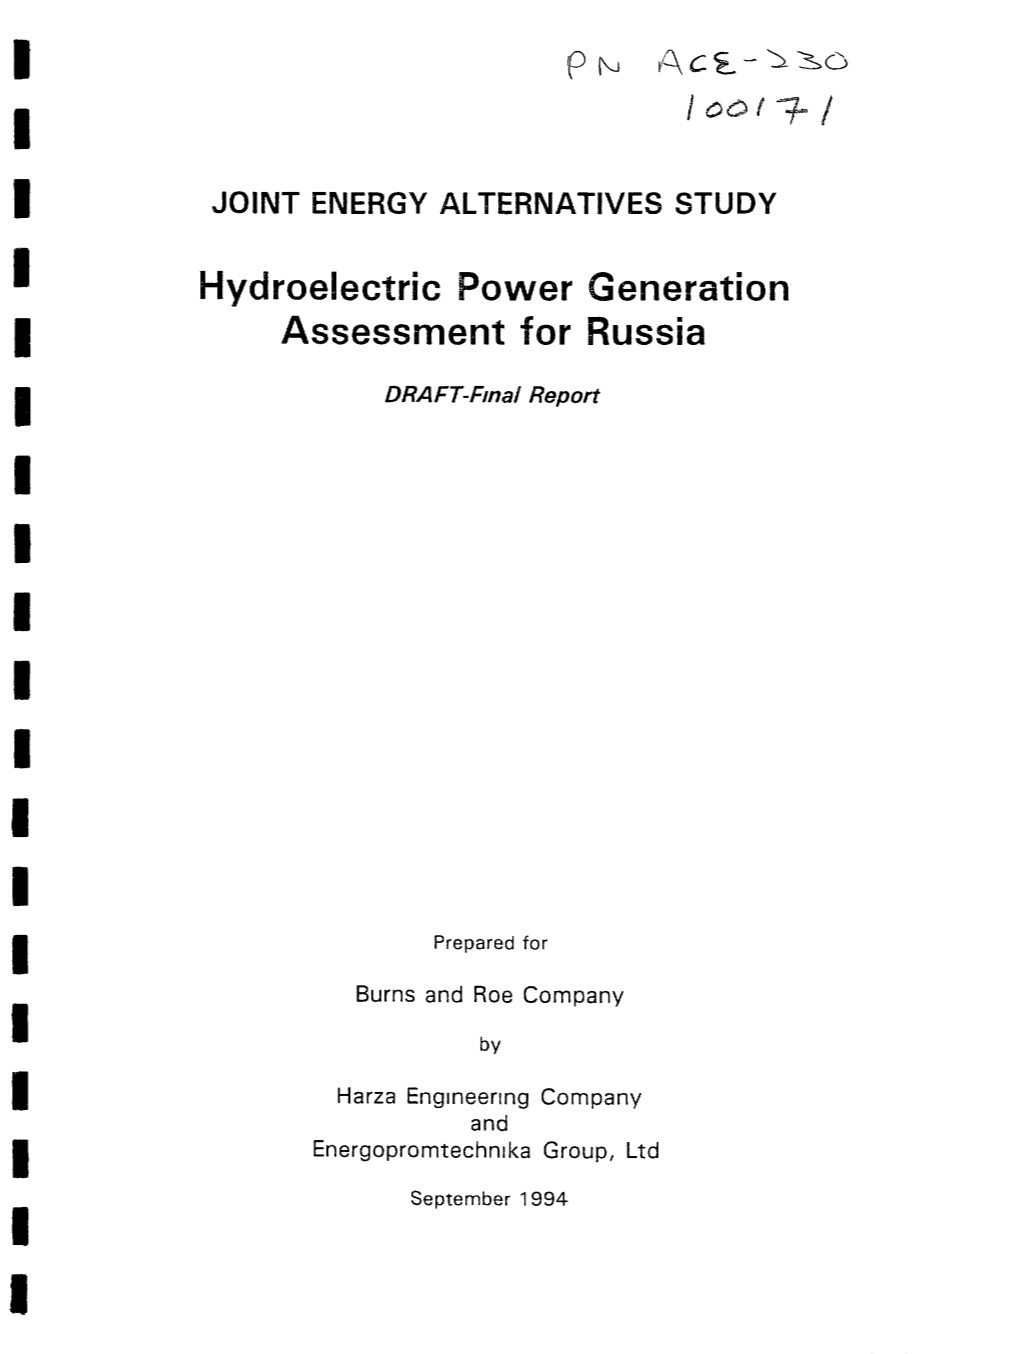 Hydroelectric Power Generation Assessment for Russia